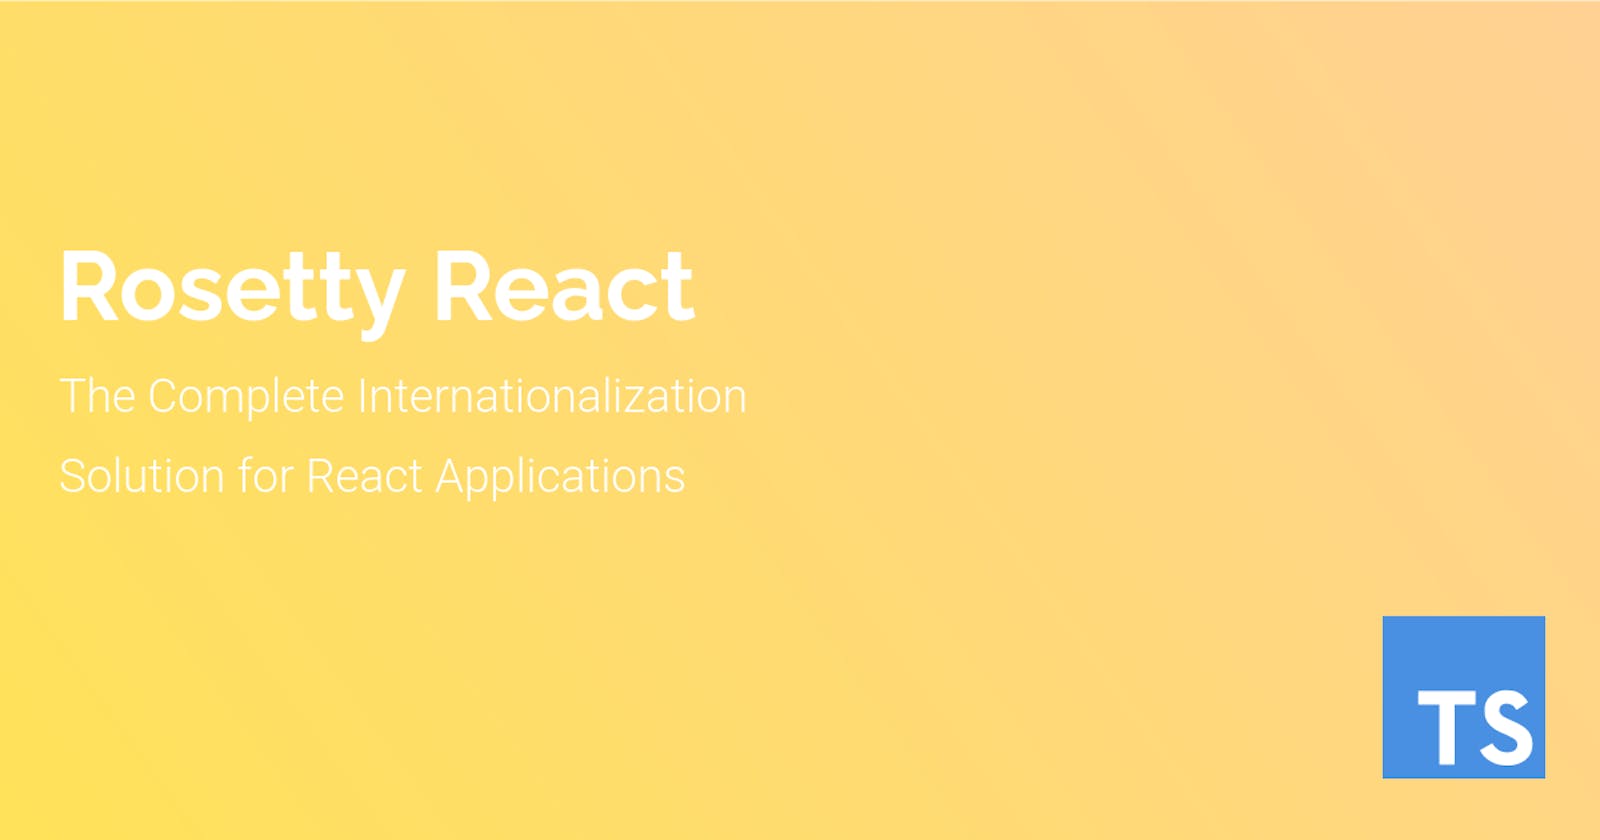 Rosetty React: The Complete Internationalization Solution for React Applications